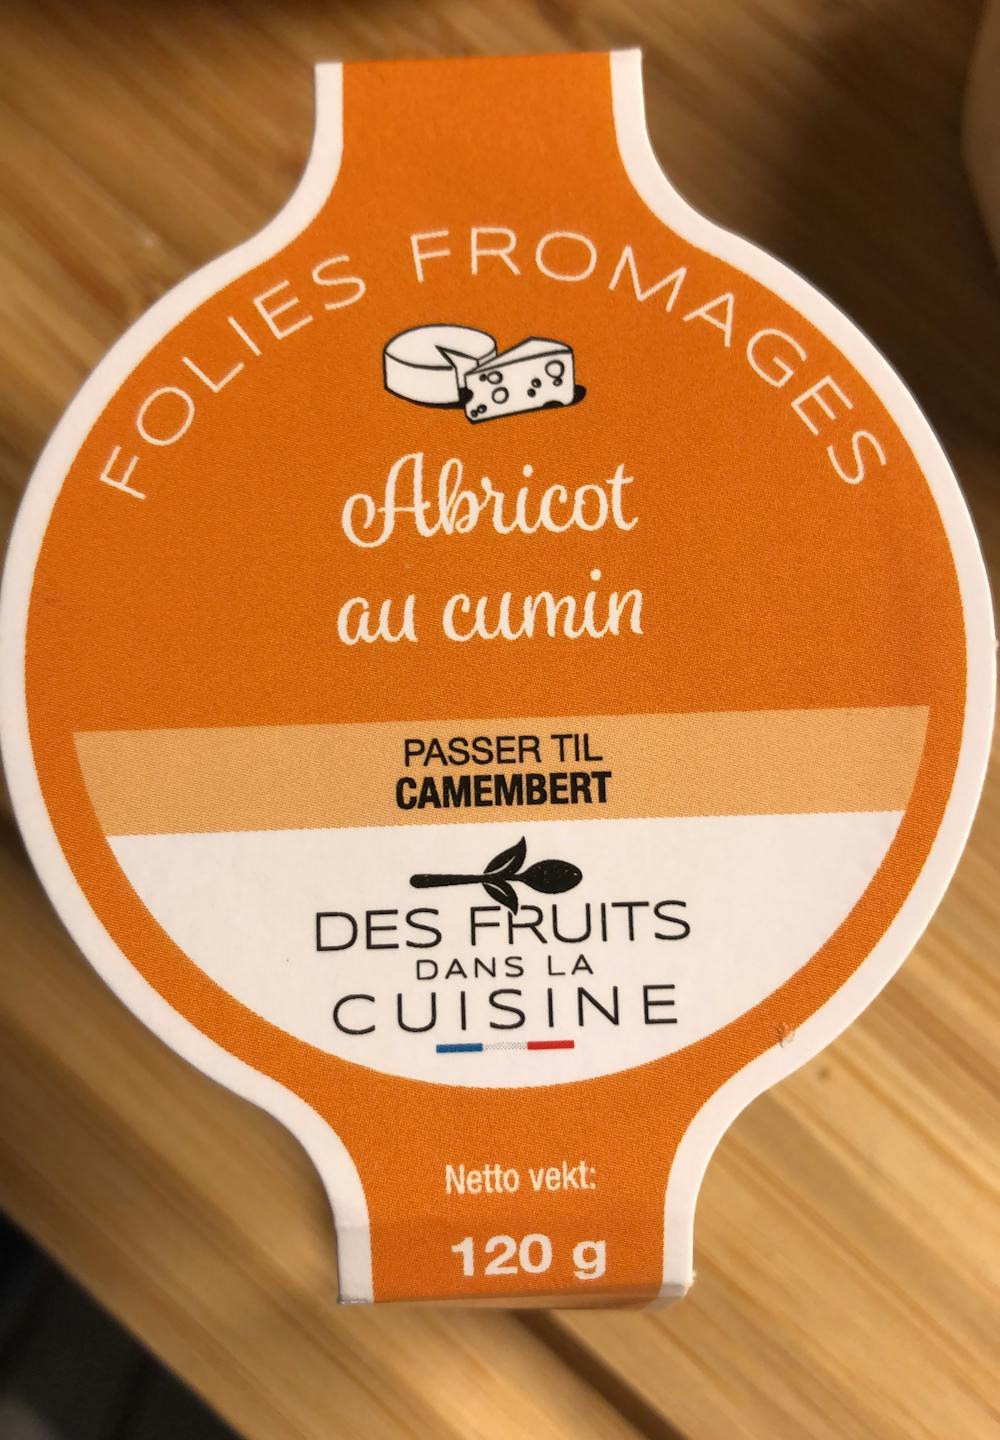 Abricot au cumin, Floies fromages